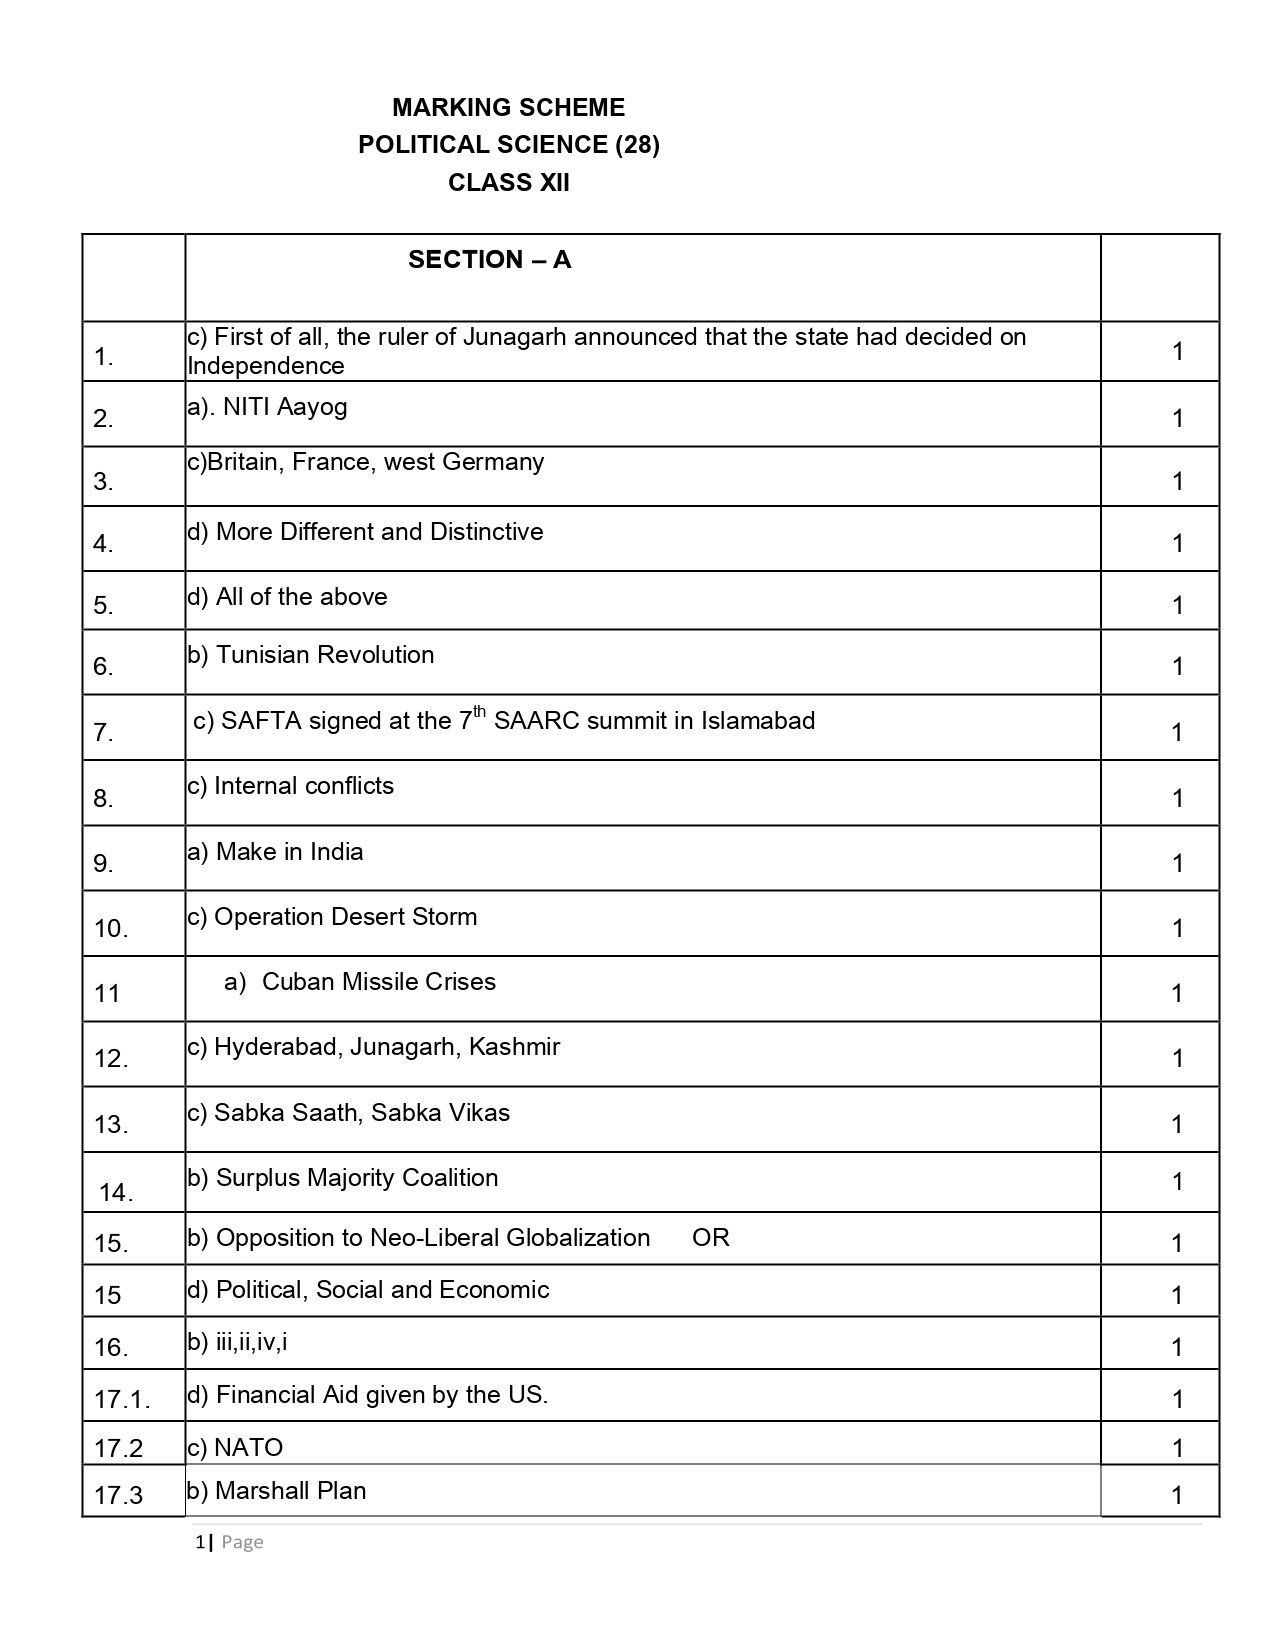 CBSE Class 12 Marking Scheme 2021 for Political Science - Page 1